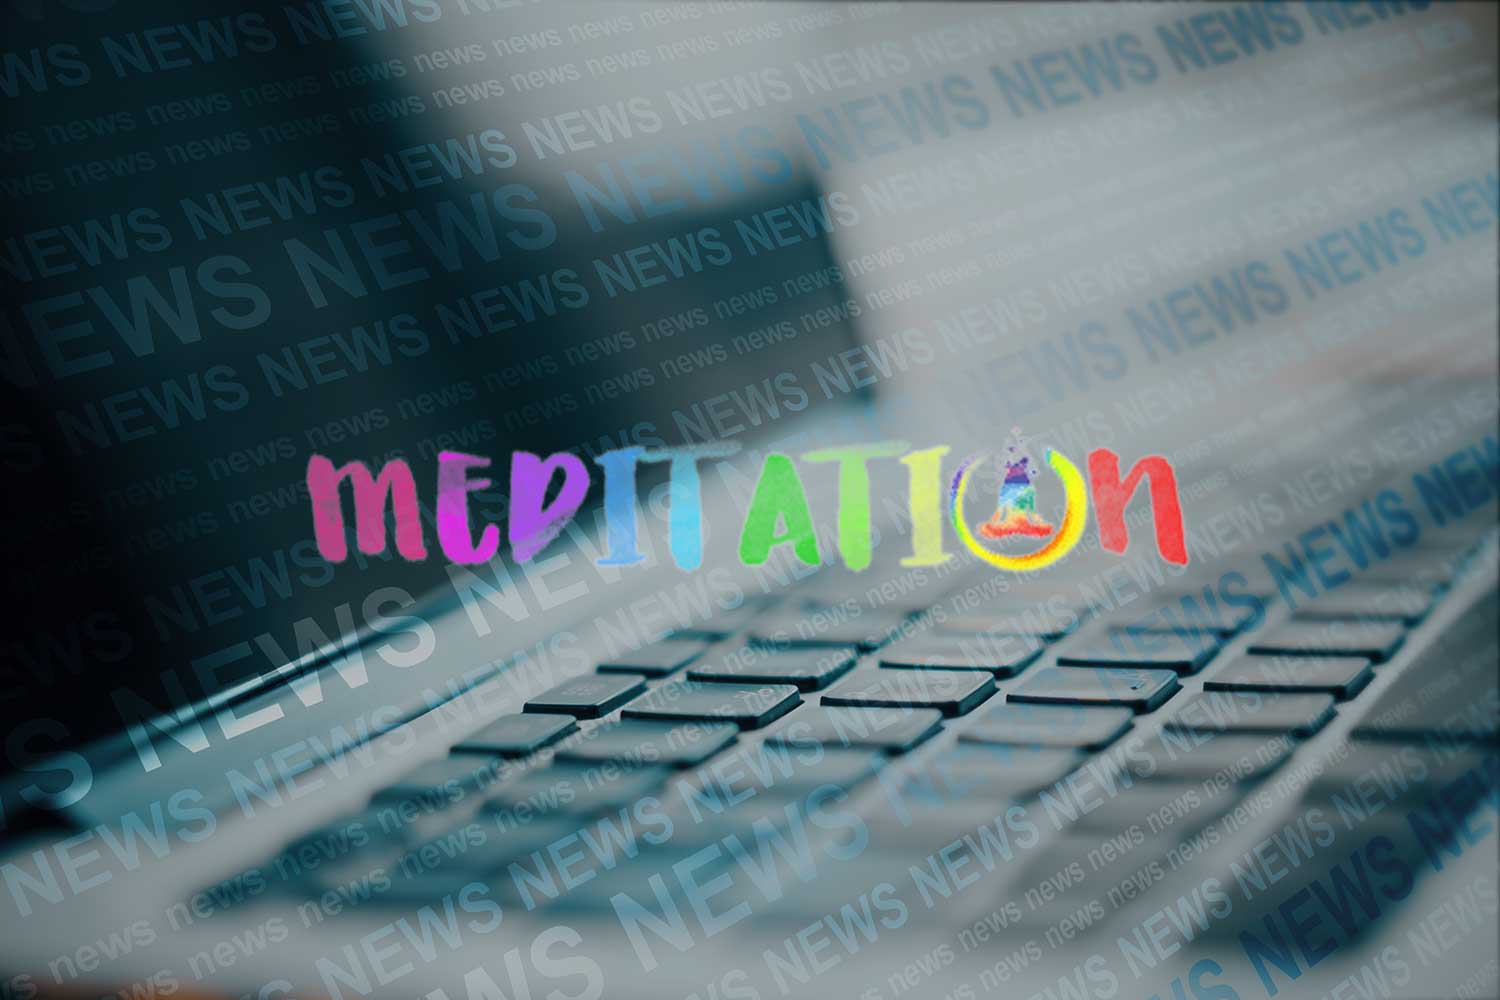 Meditation Magazine: Can CBD be used to enhance our meditation practice?